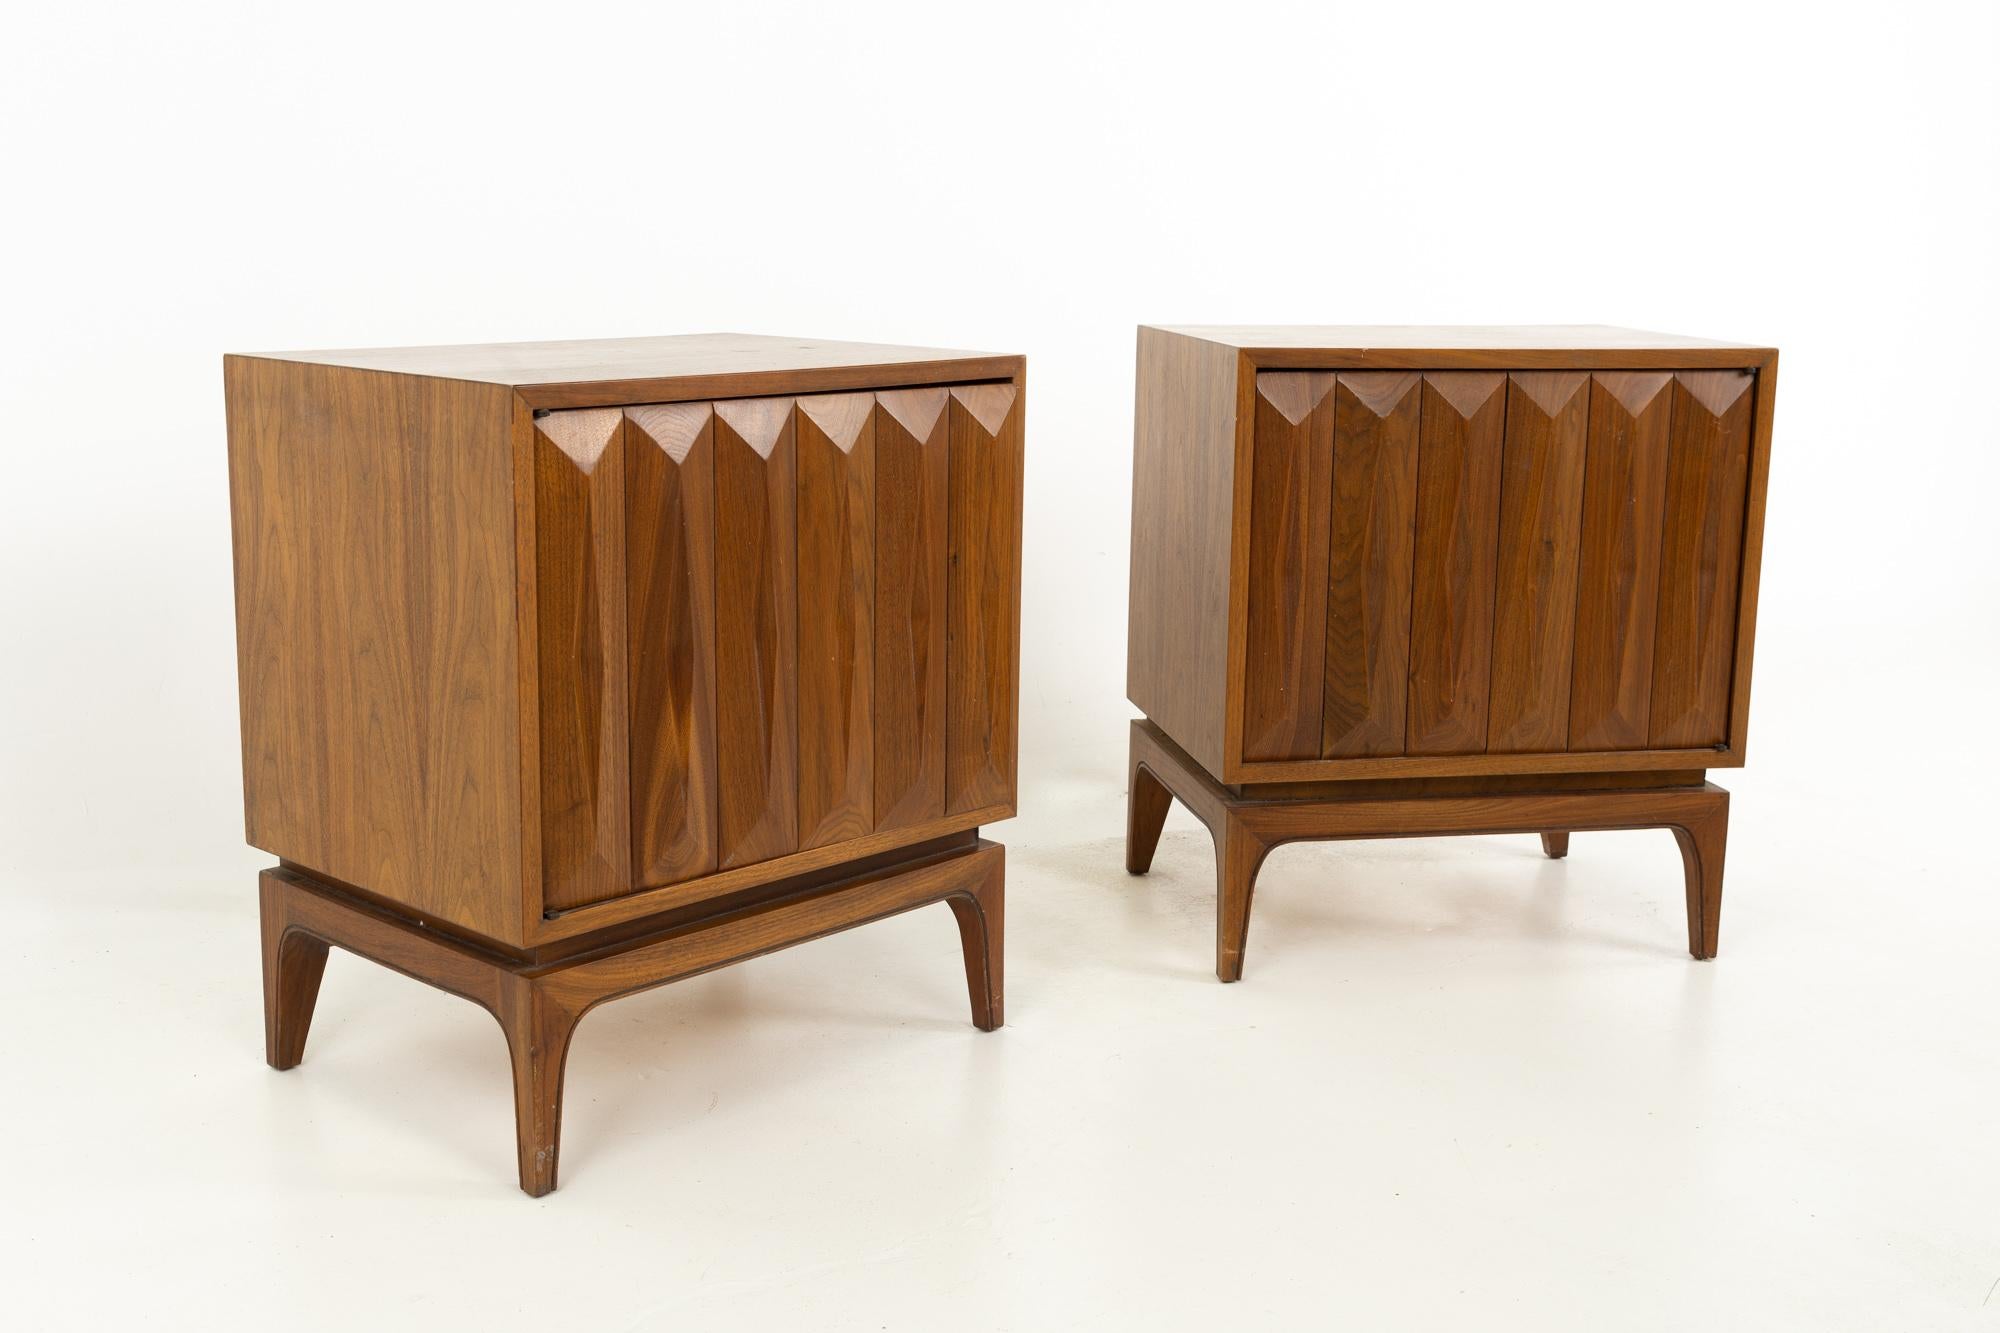 Albert Parvin for American of Martinsville Style Mid Century diamond walnut nightstands - Pair

These nightstands are 21.5 wide x 16 deep x 25 inches high

All pieces of furniture can be had in what we call restored vintage condition. That means